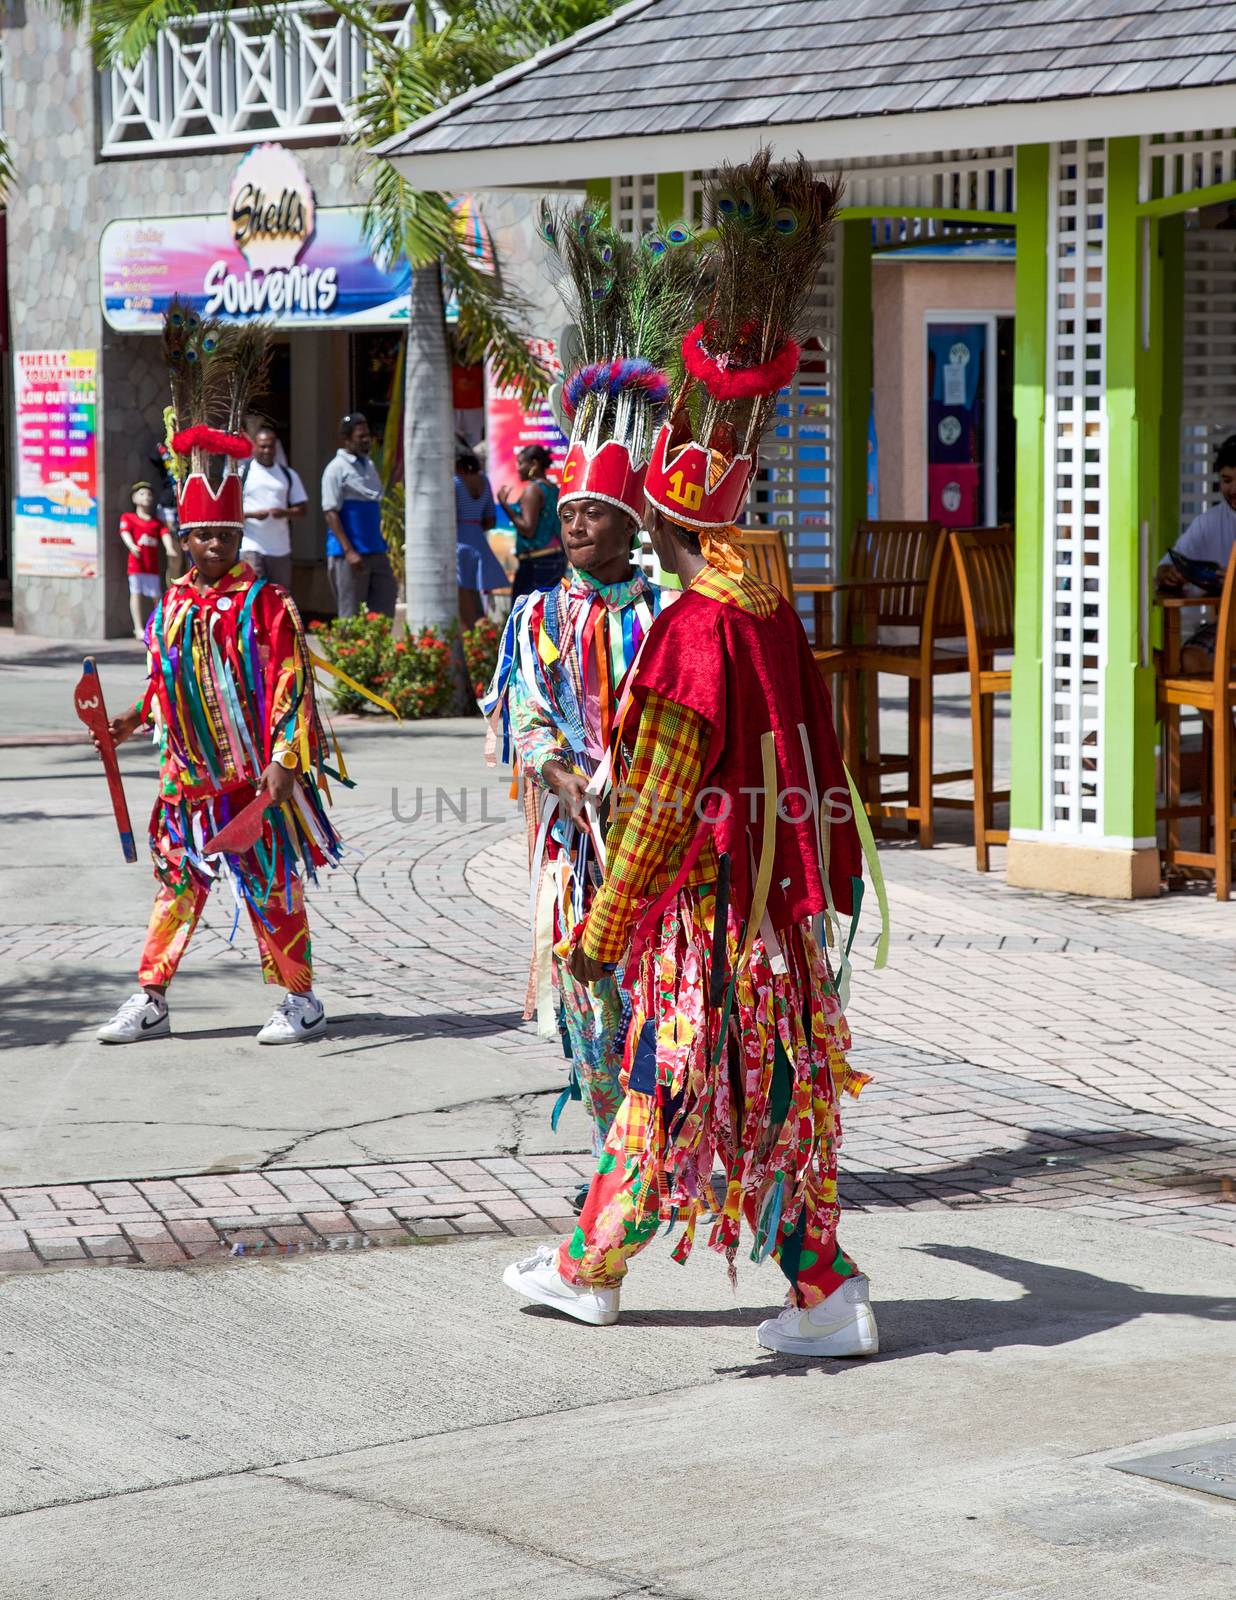 Basseterre, Saint Kitts and Nevis- June 21, 2013: Colorfully dresses island dancers move to their next performance location on this small Caribbean island nation.